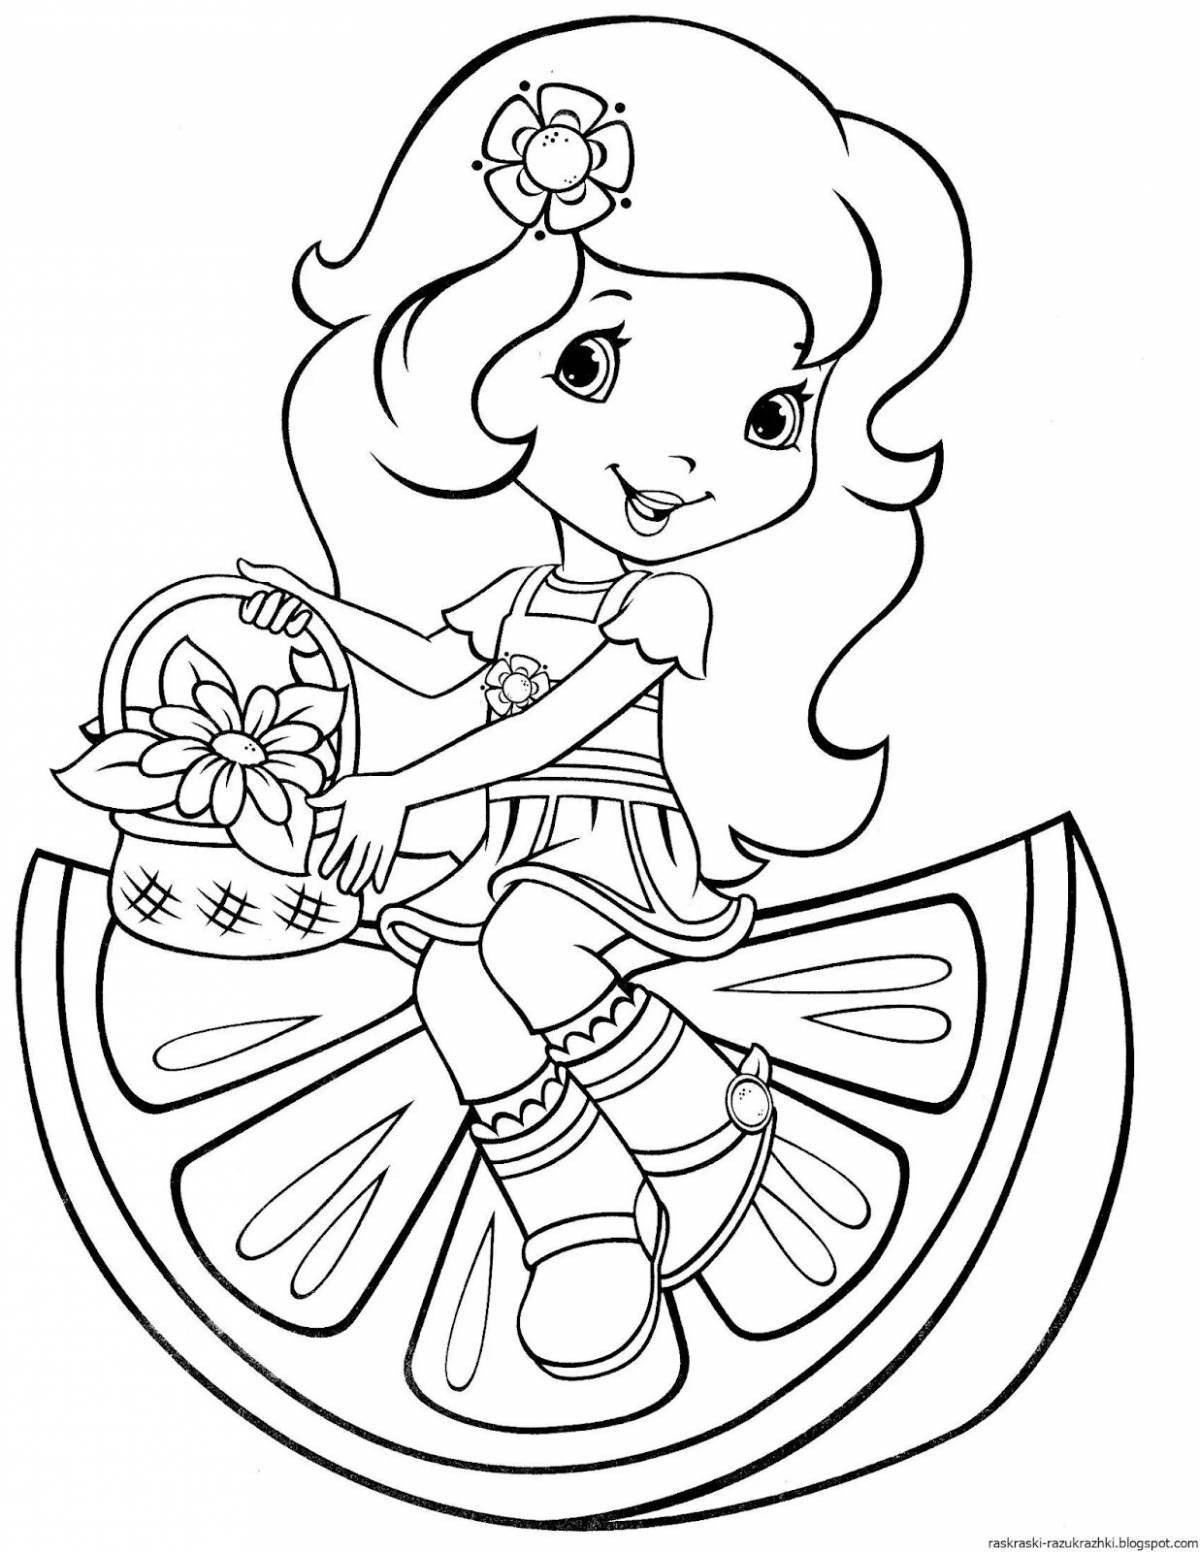 Princess coloring pages 4-5 years old